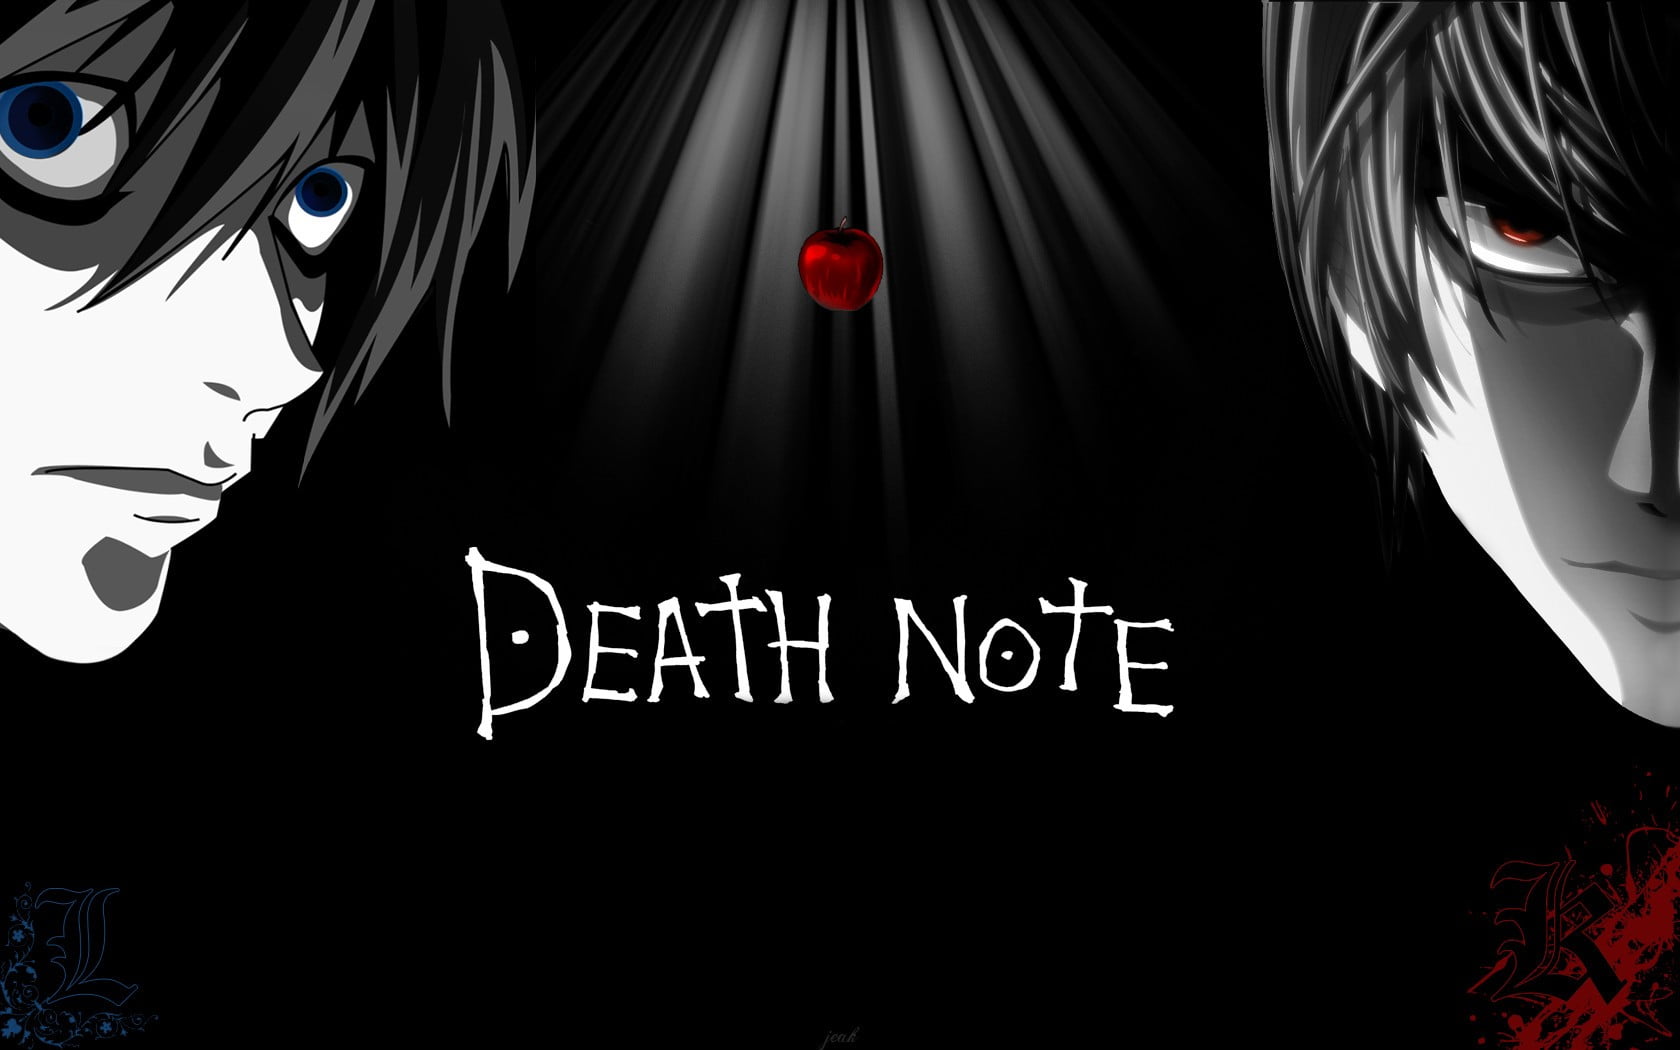 Death Note Wallpaper Anime Death Note Lawliet L Yagami Light Hd